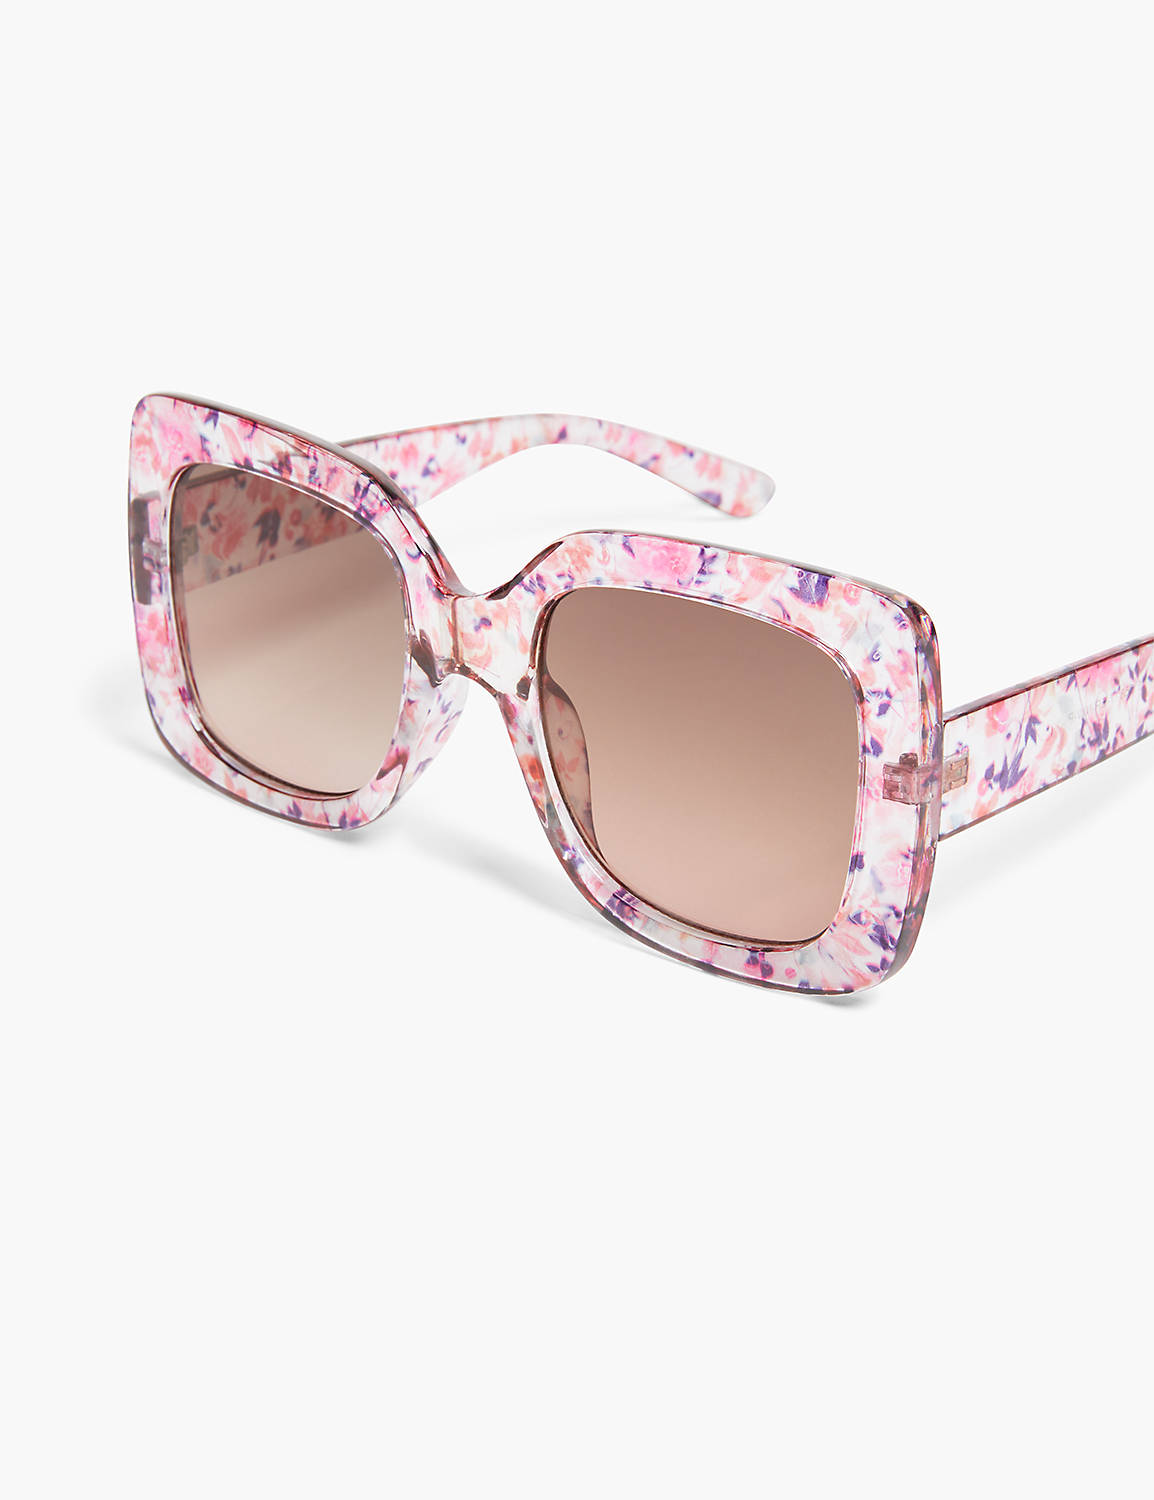 Pink Floral Oversized Square Sungla Product Image 1